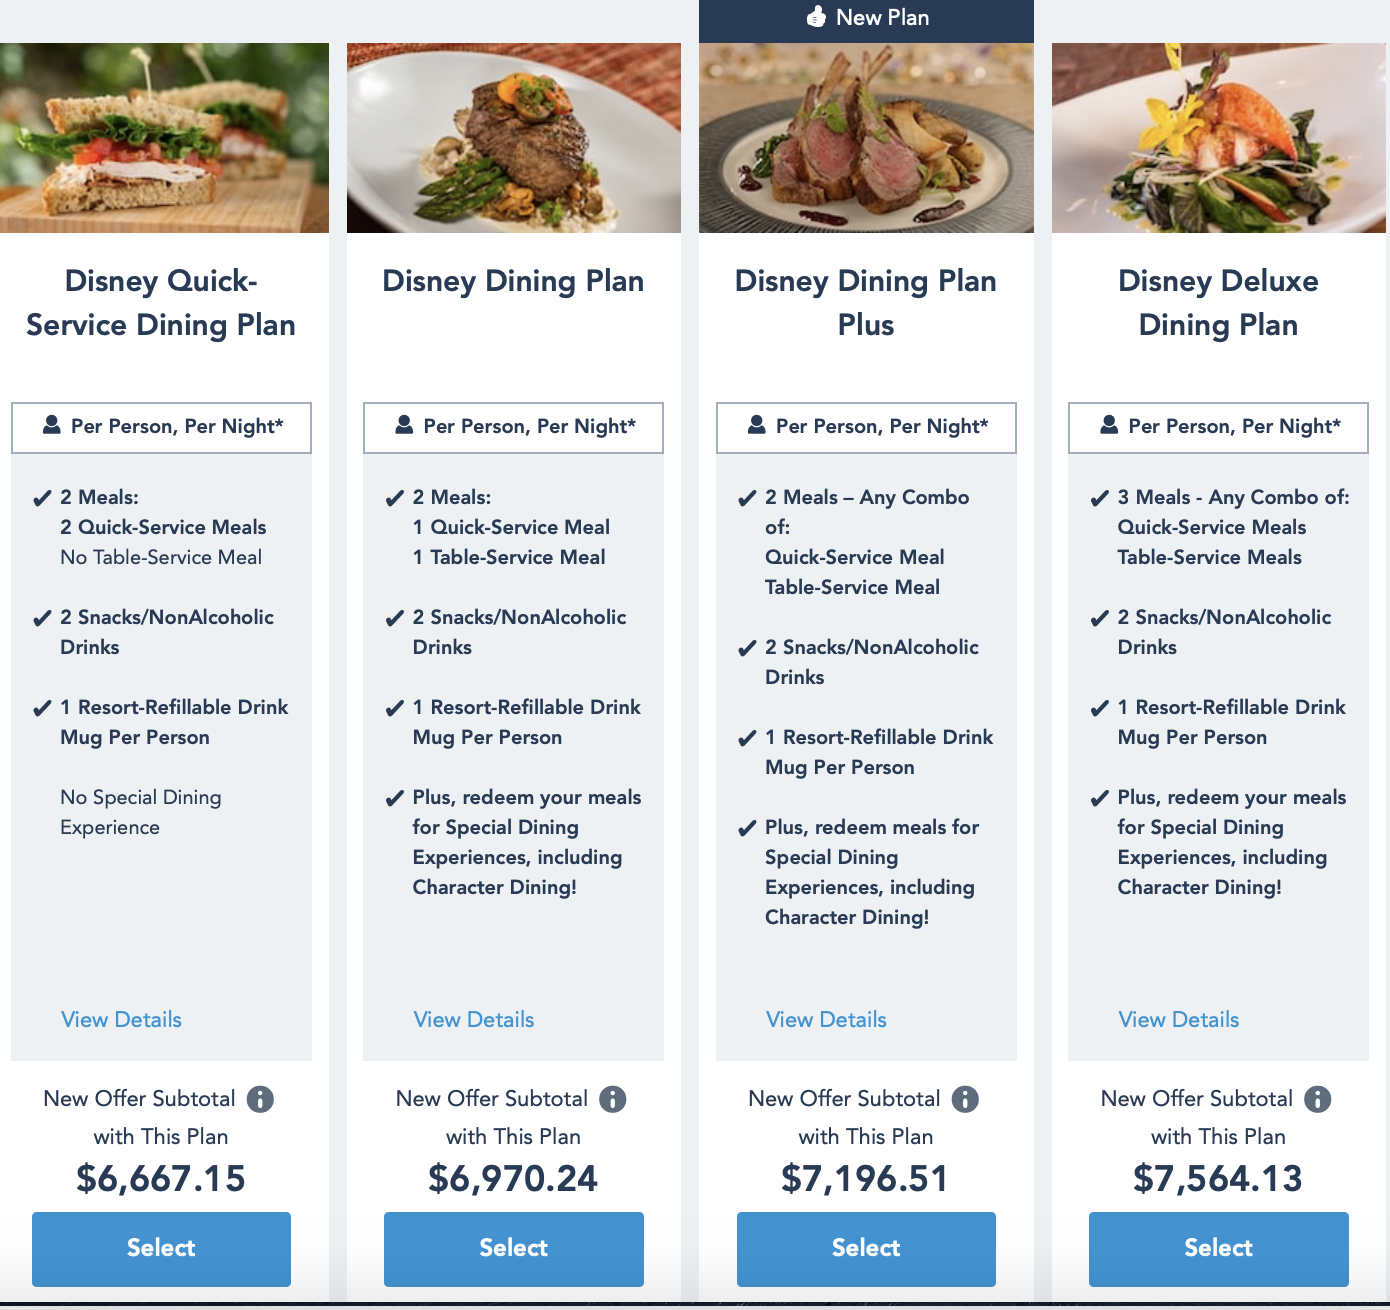 Disney's NEW Dining Plan Plus Option Is Now Available! - AllEars.Net